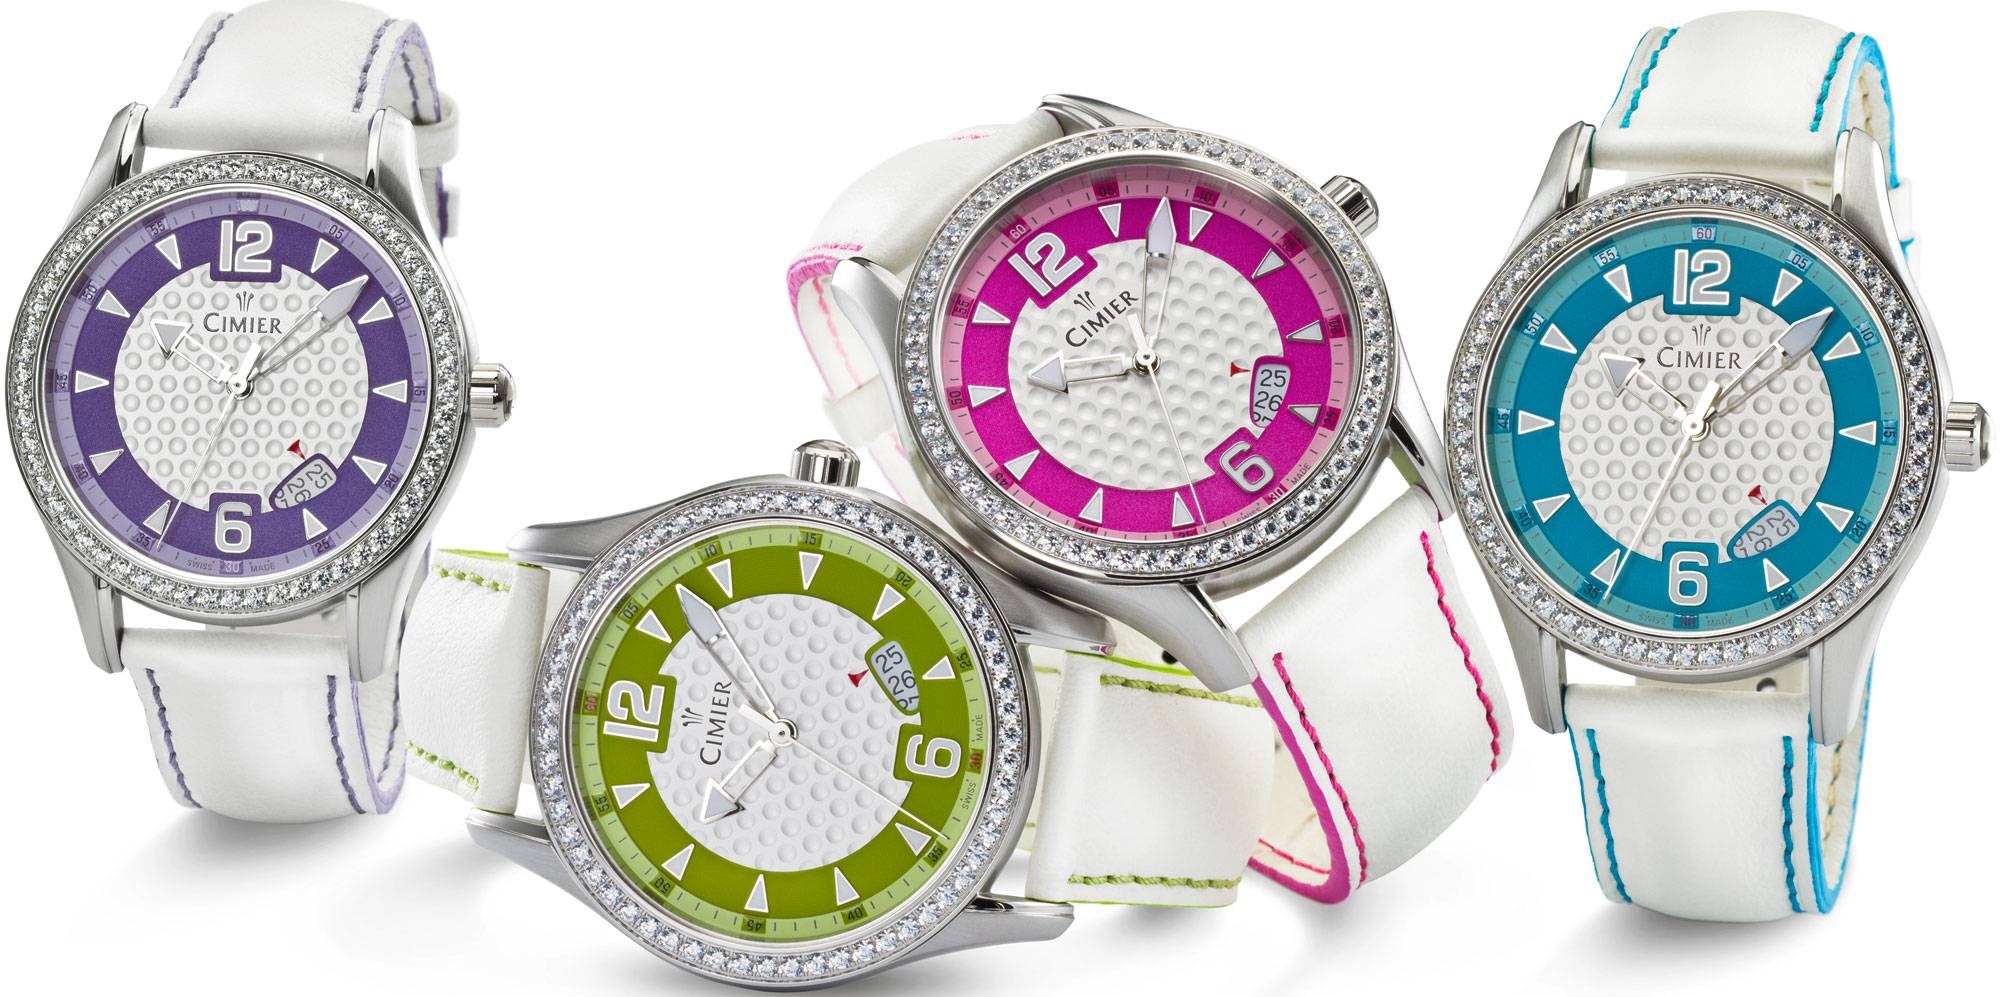 Fastrack Watches - Model : 6015SL02 female watches - Buyatbrands.com